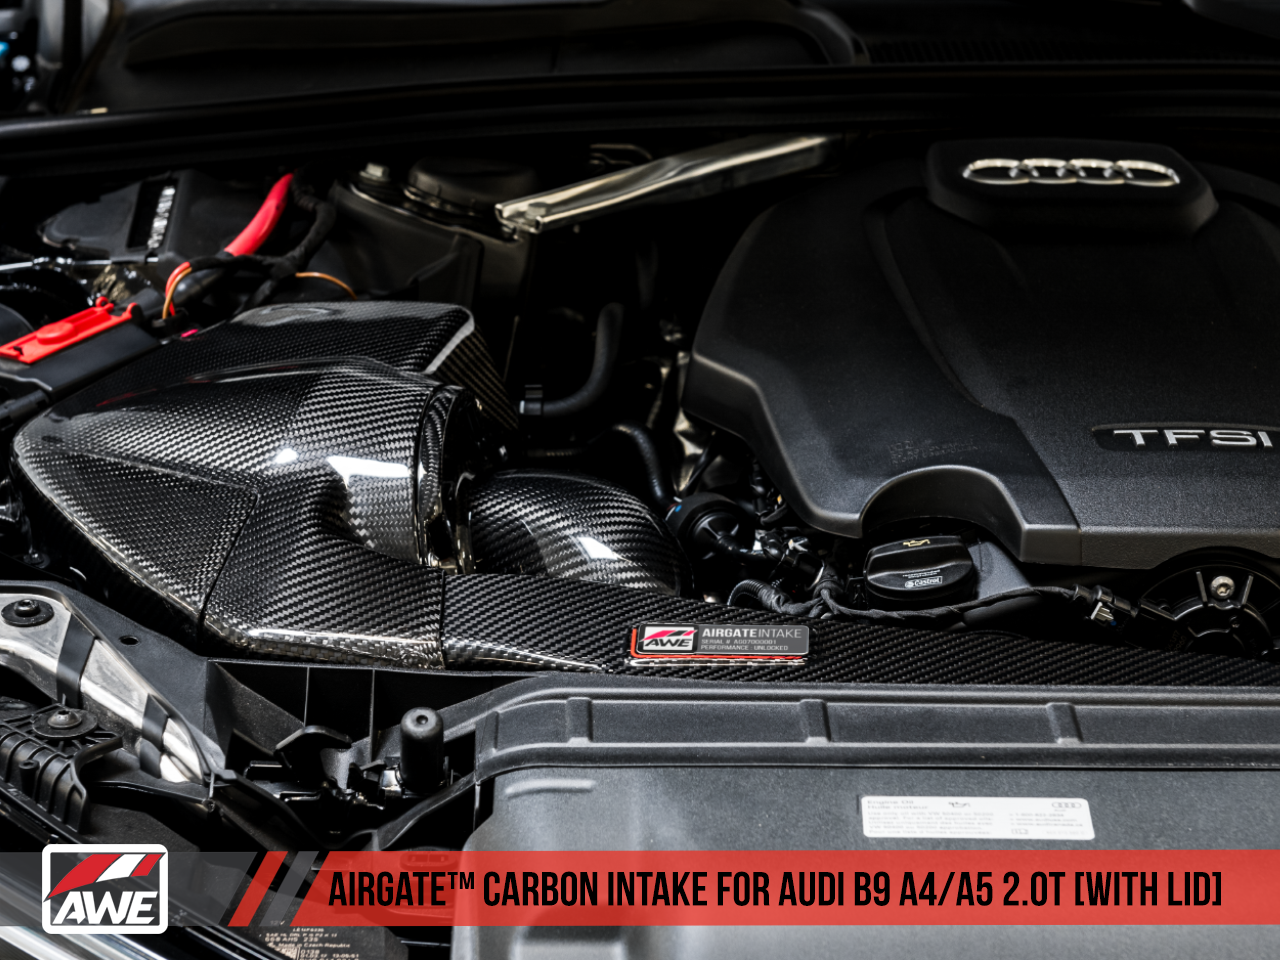 AWE AirGate™ Carbon Fiber Intake for Audi B9 A4 / A5 2.0T - With Lid - 0